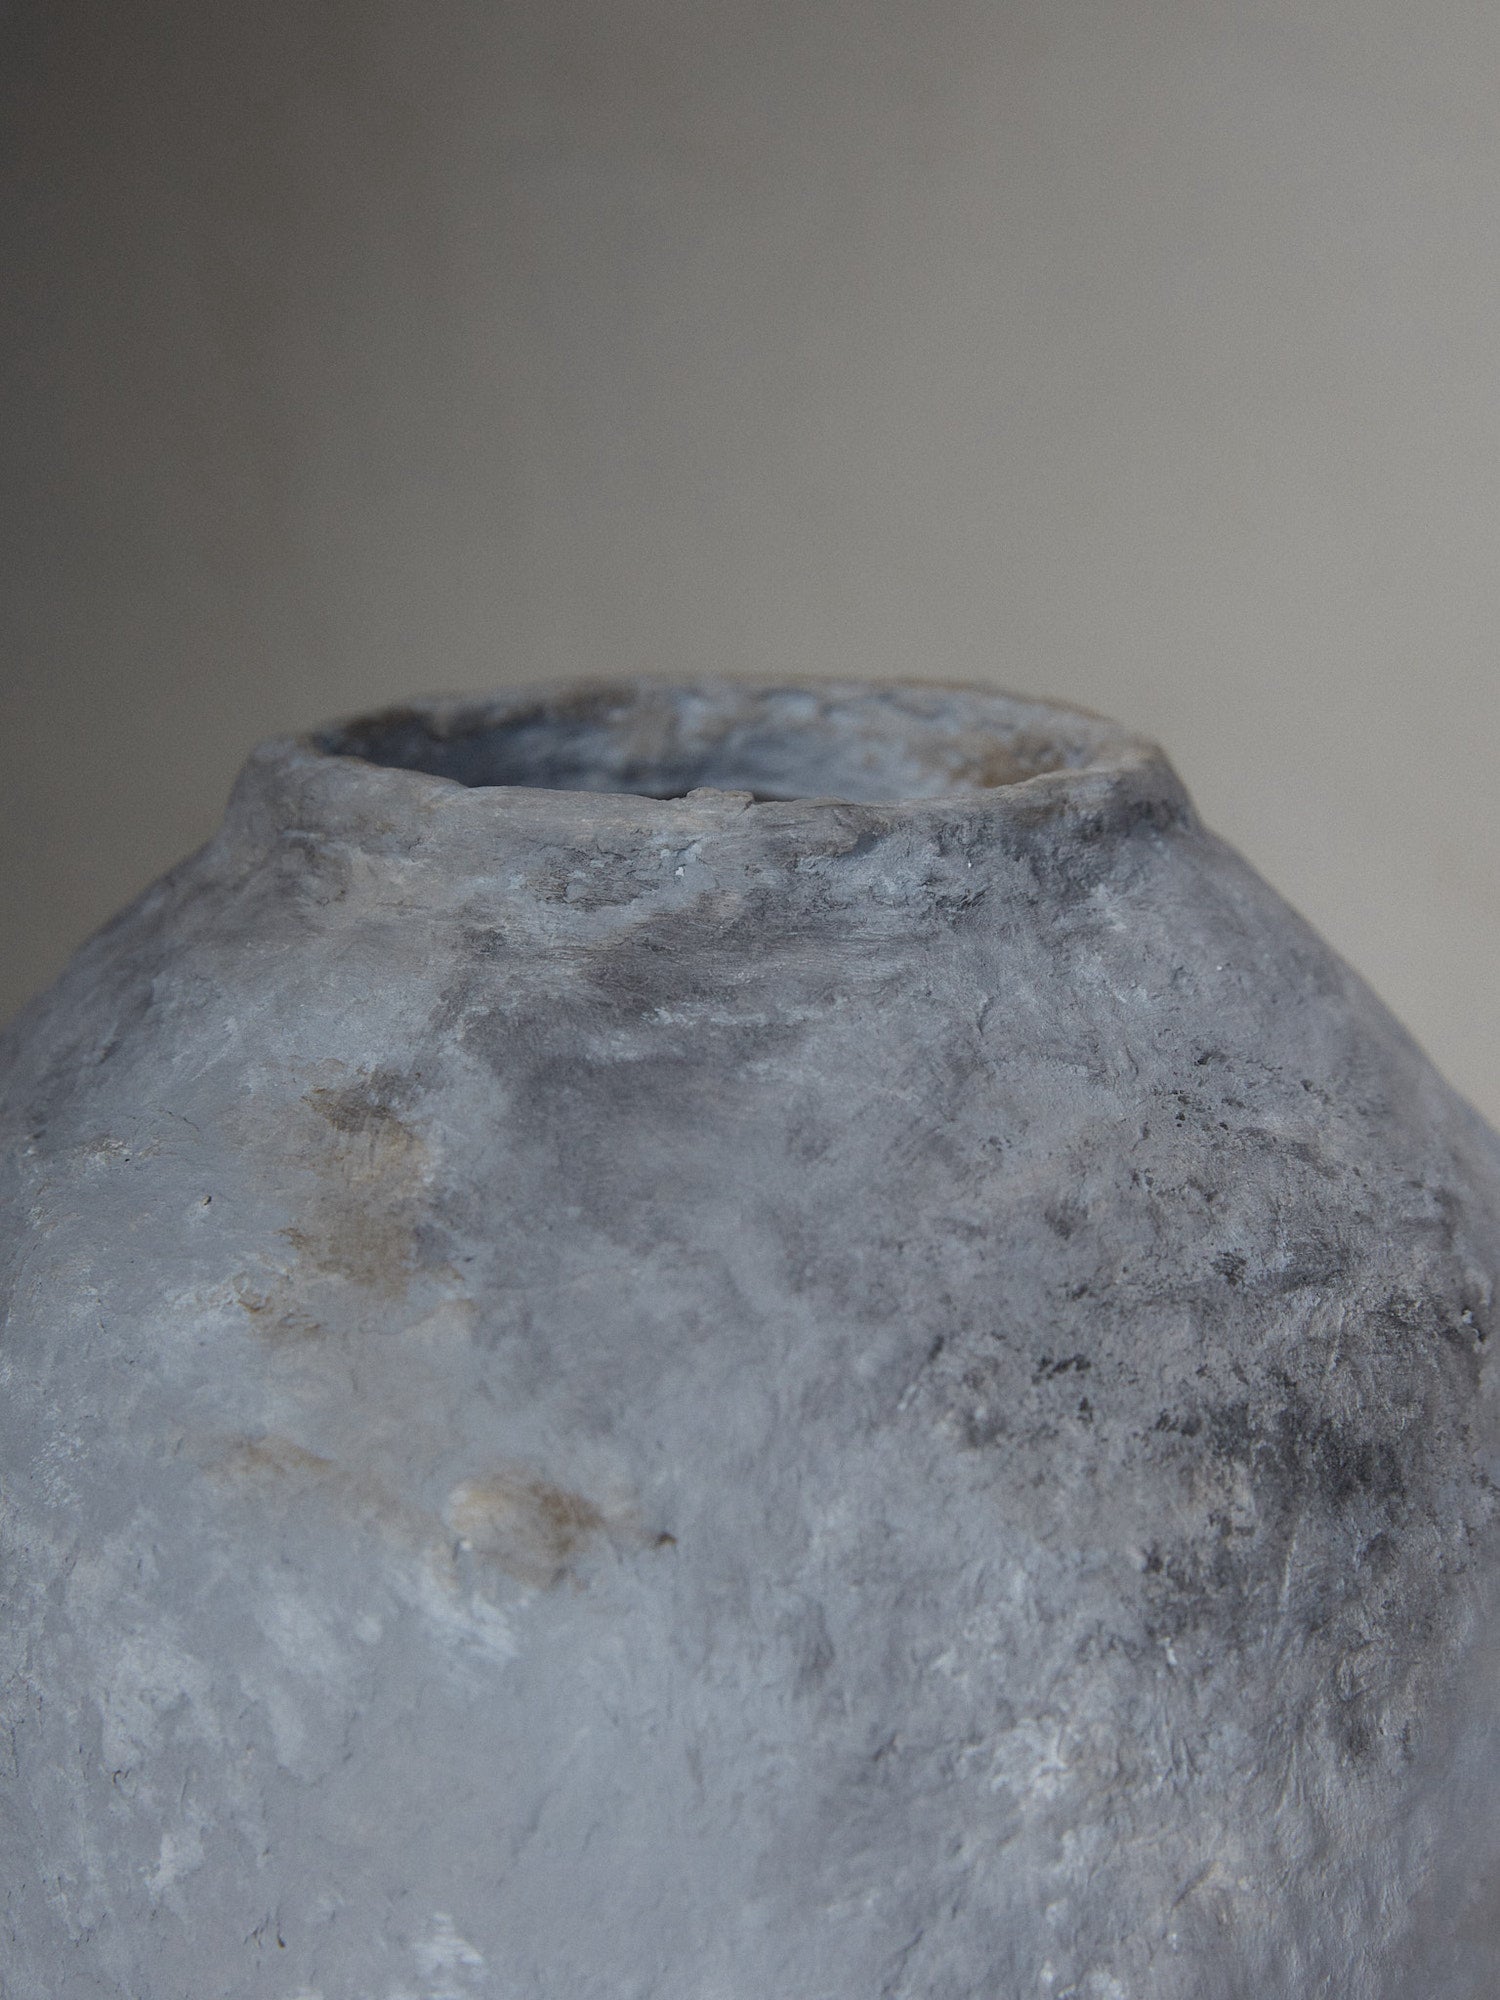 Johanne Vase. Rare find. Hand sculpted, slim footed textural vase in stone grey tones made from sustainable paper maché. 